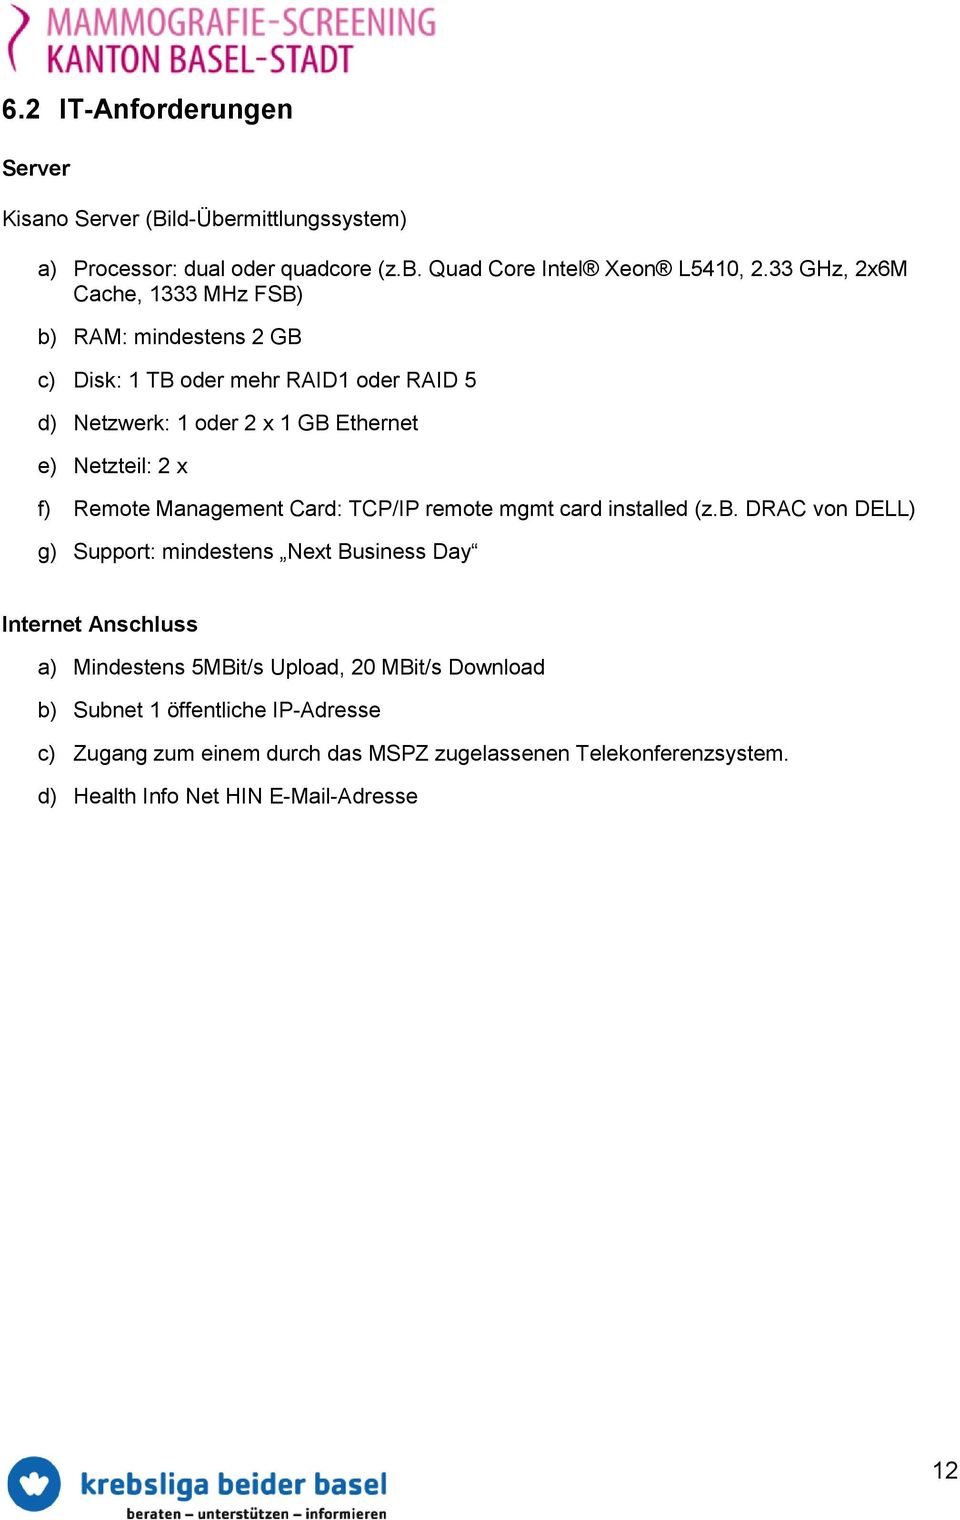 f) Remote Management Card: TCP/IP remote mgmt card installed (z.b.